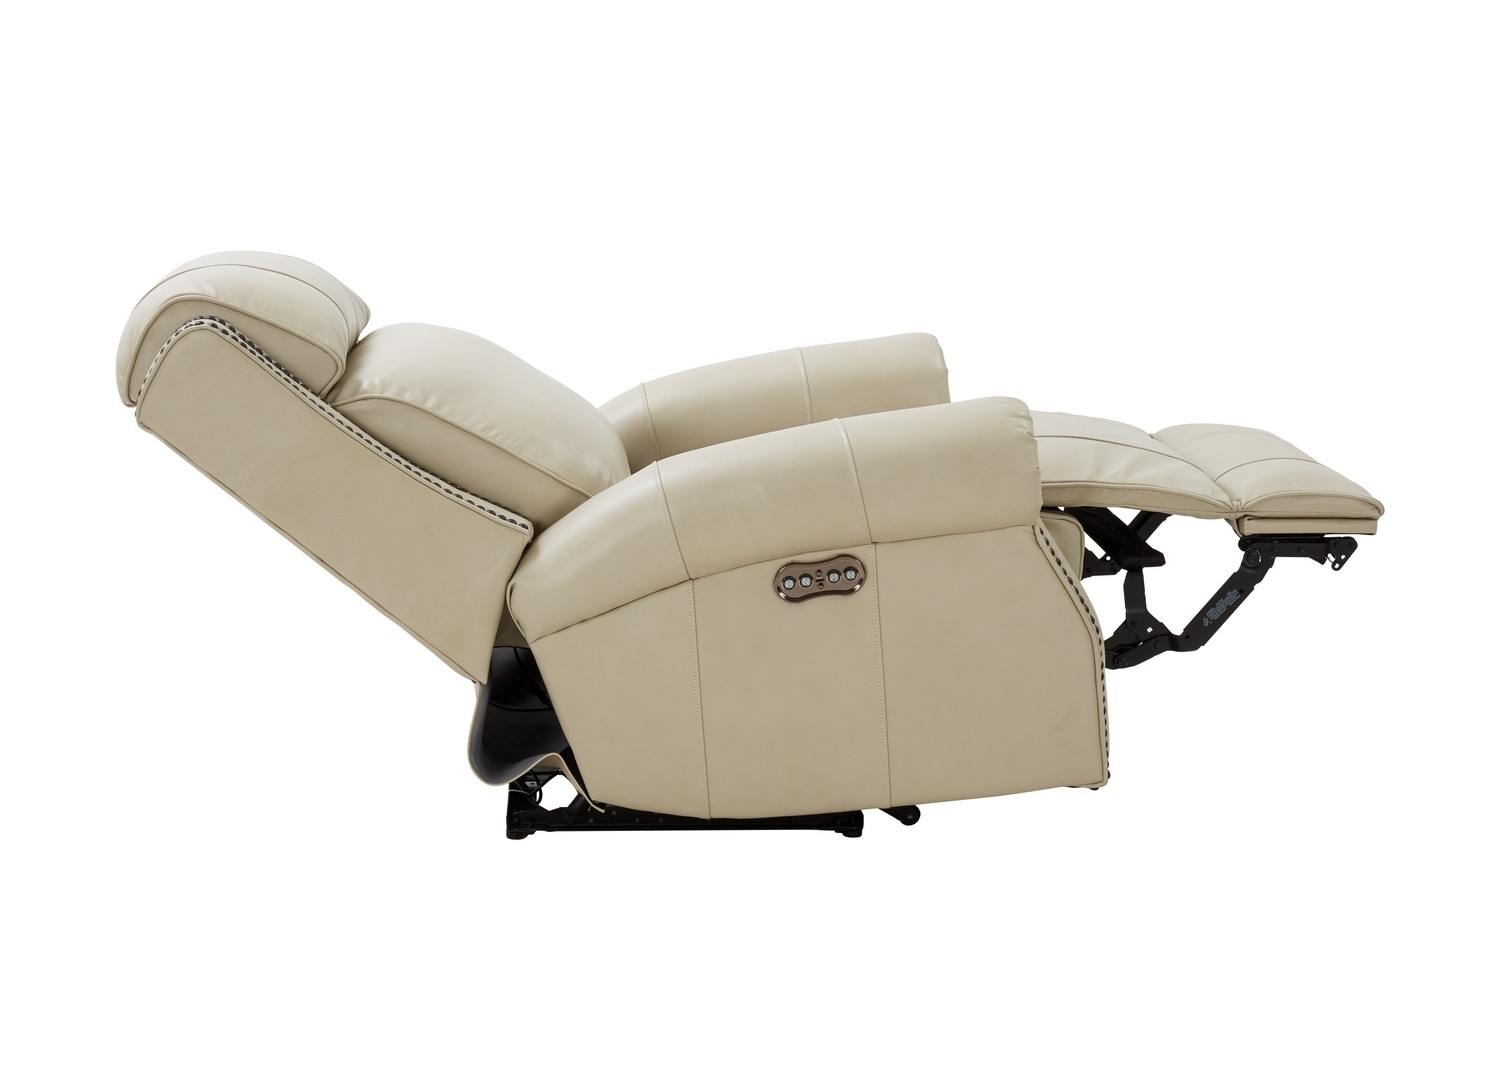 Barcalounger Blair Big and Tall Power Recliner Chair with Power Head Rest - Barone Parchment/All Leather